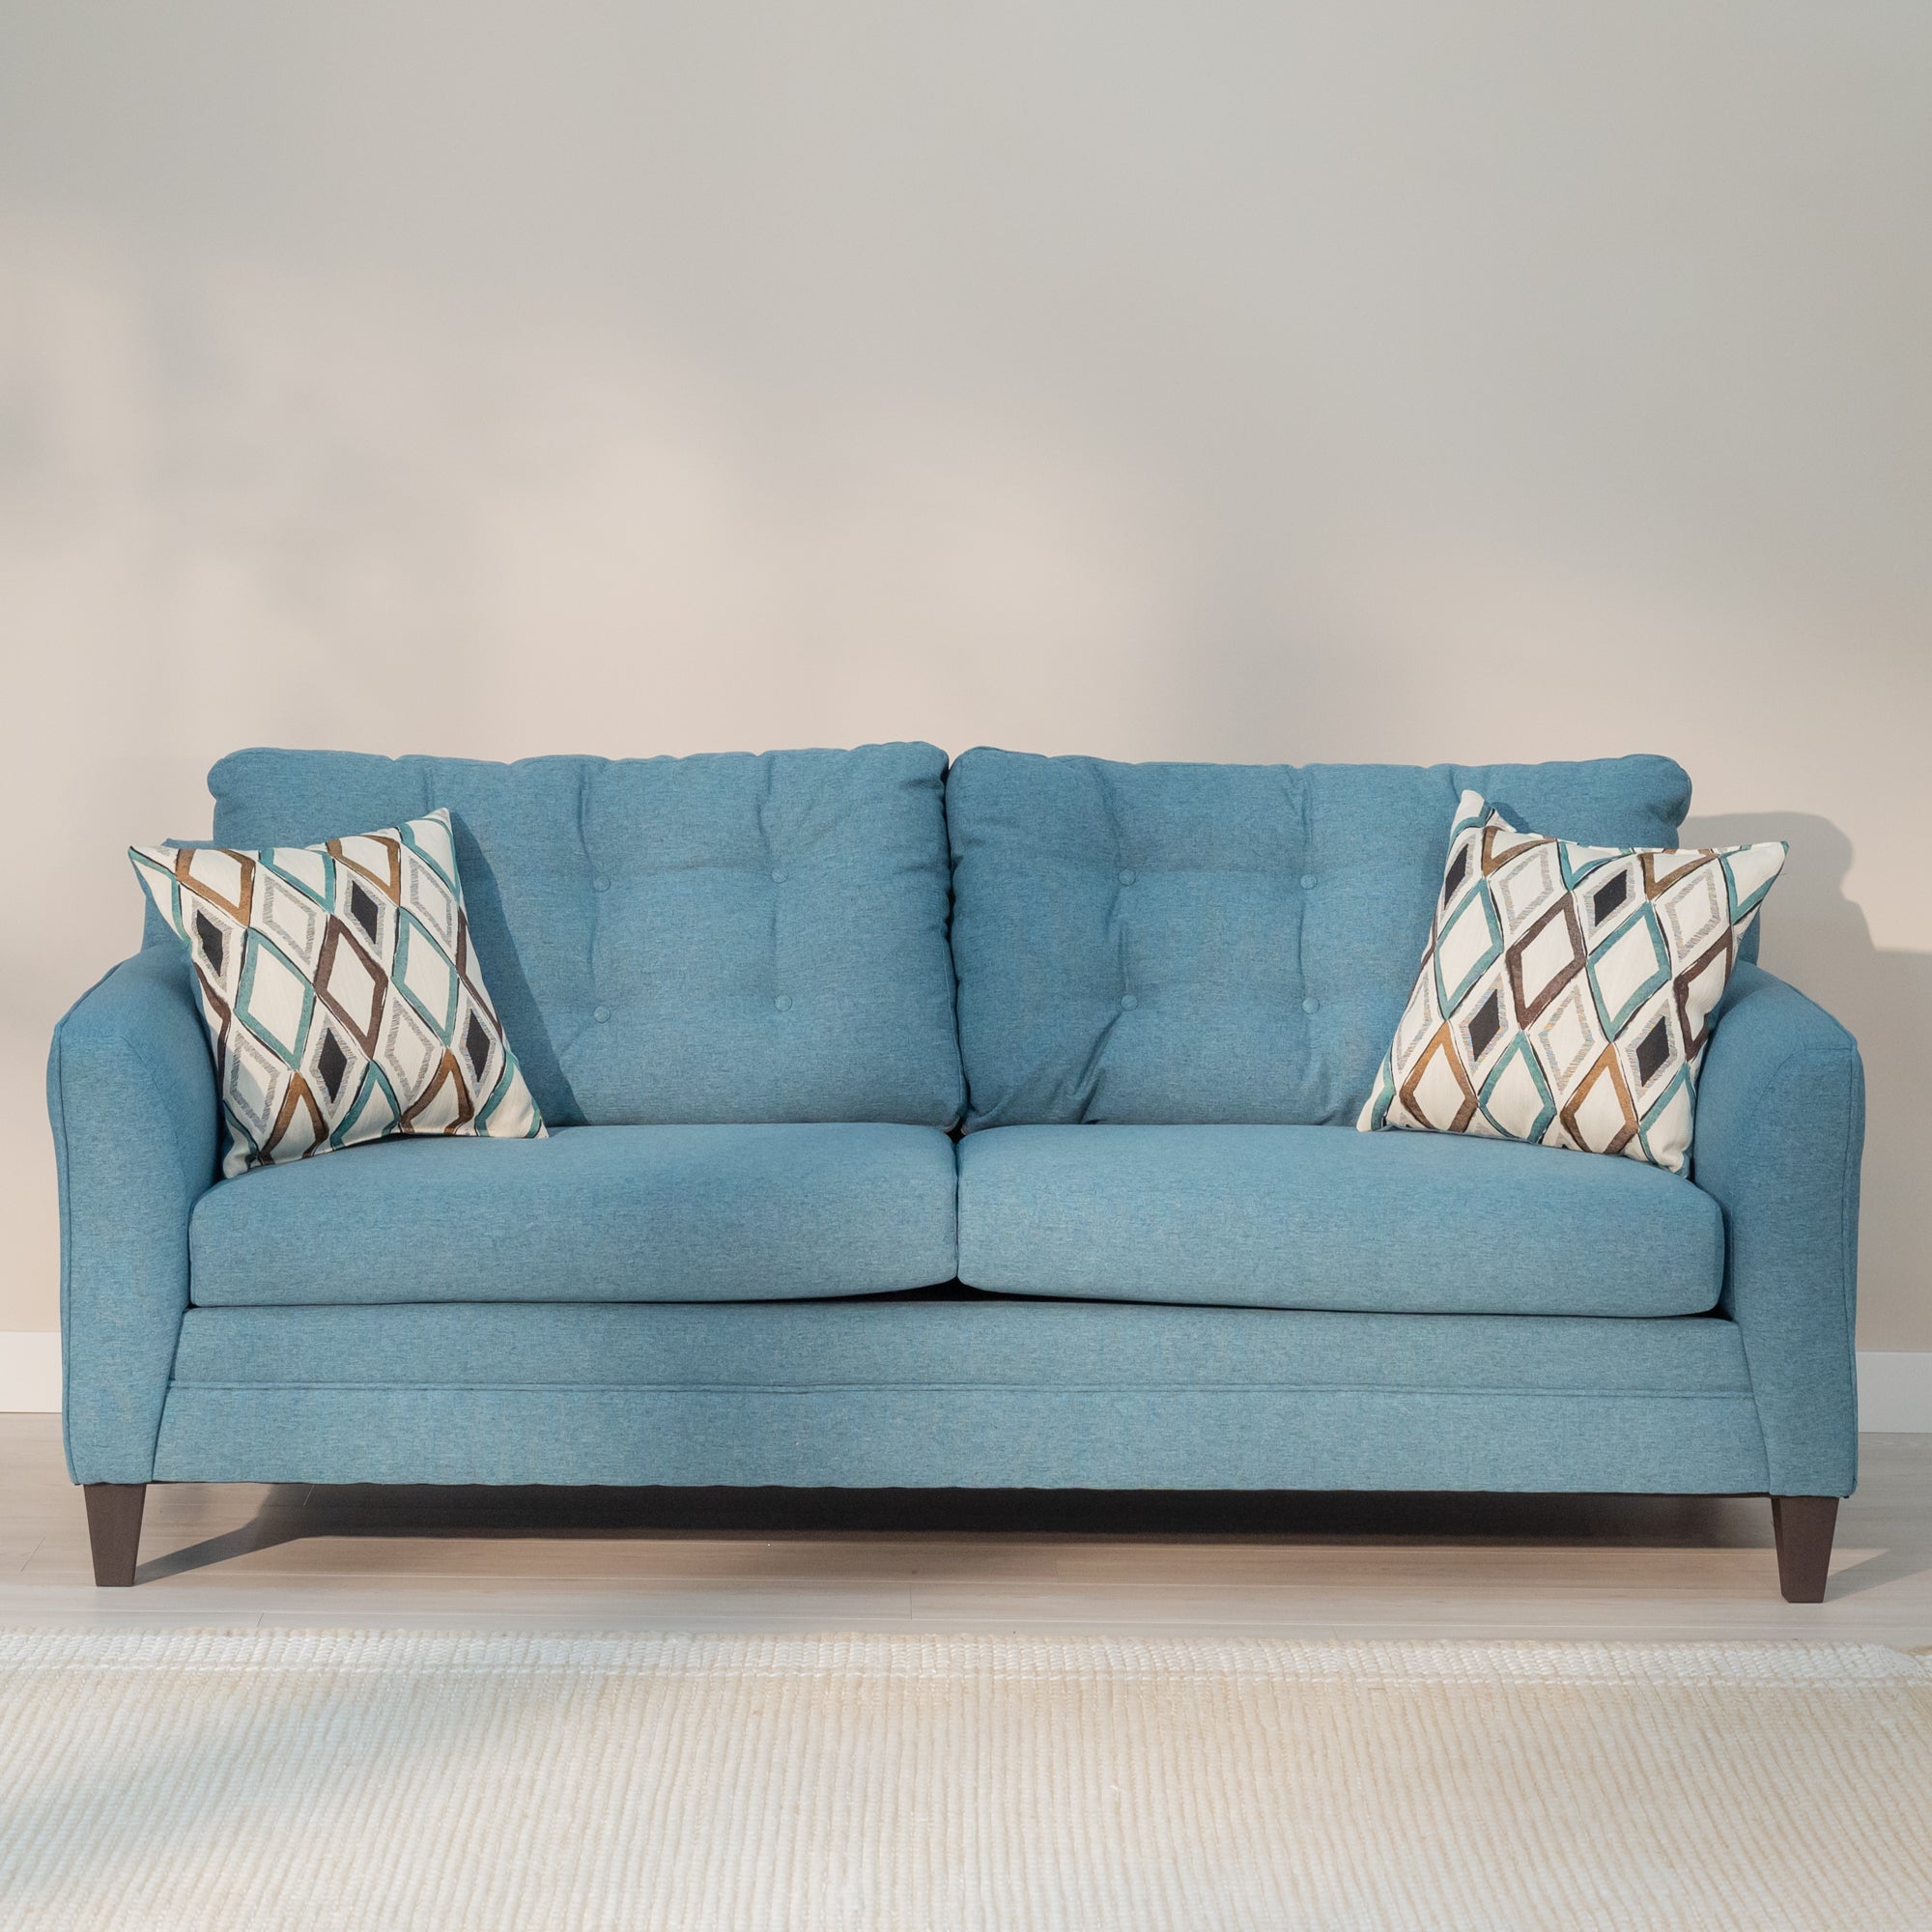 Addington Co Bayswater Sofa with Tufted Upholstery Back 81.5 inches Long, Teal Blue, 3 Seat